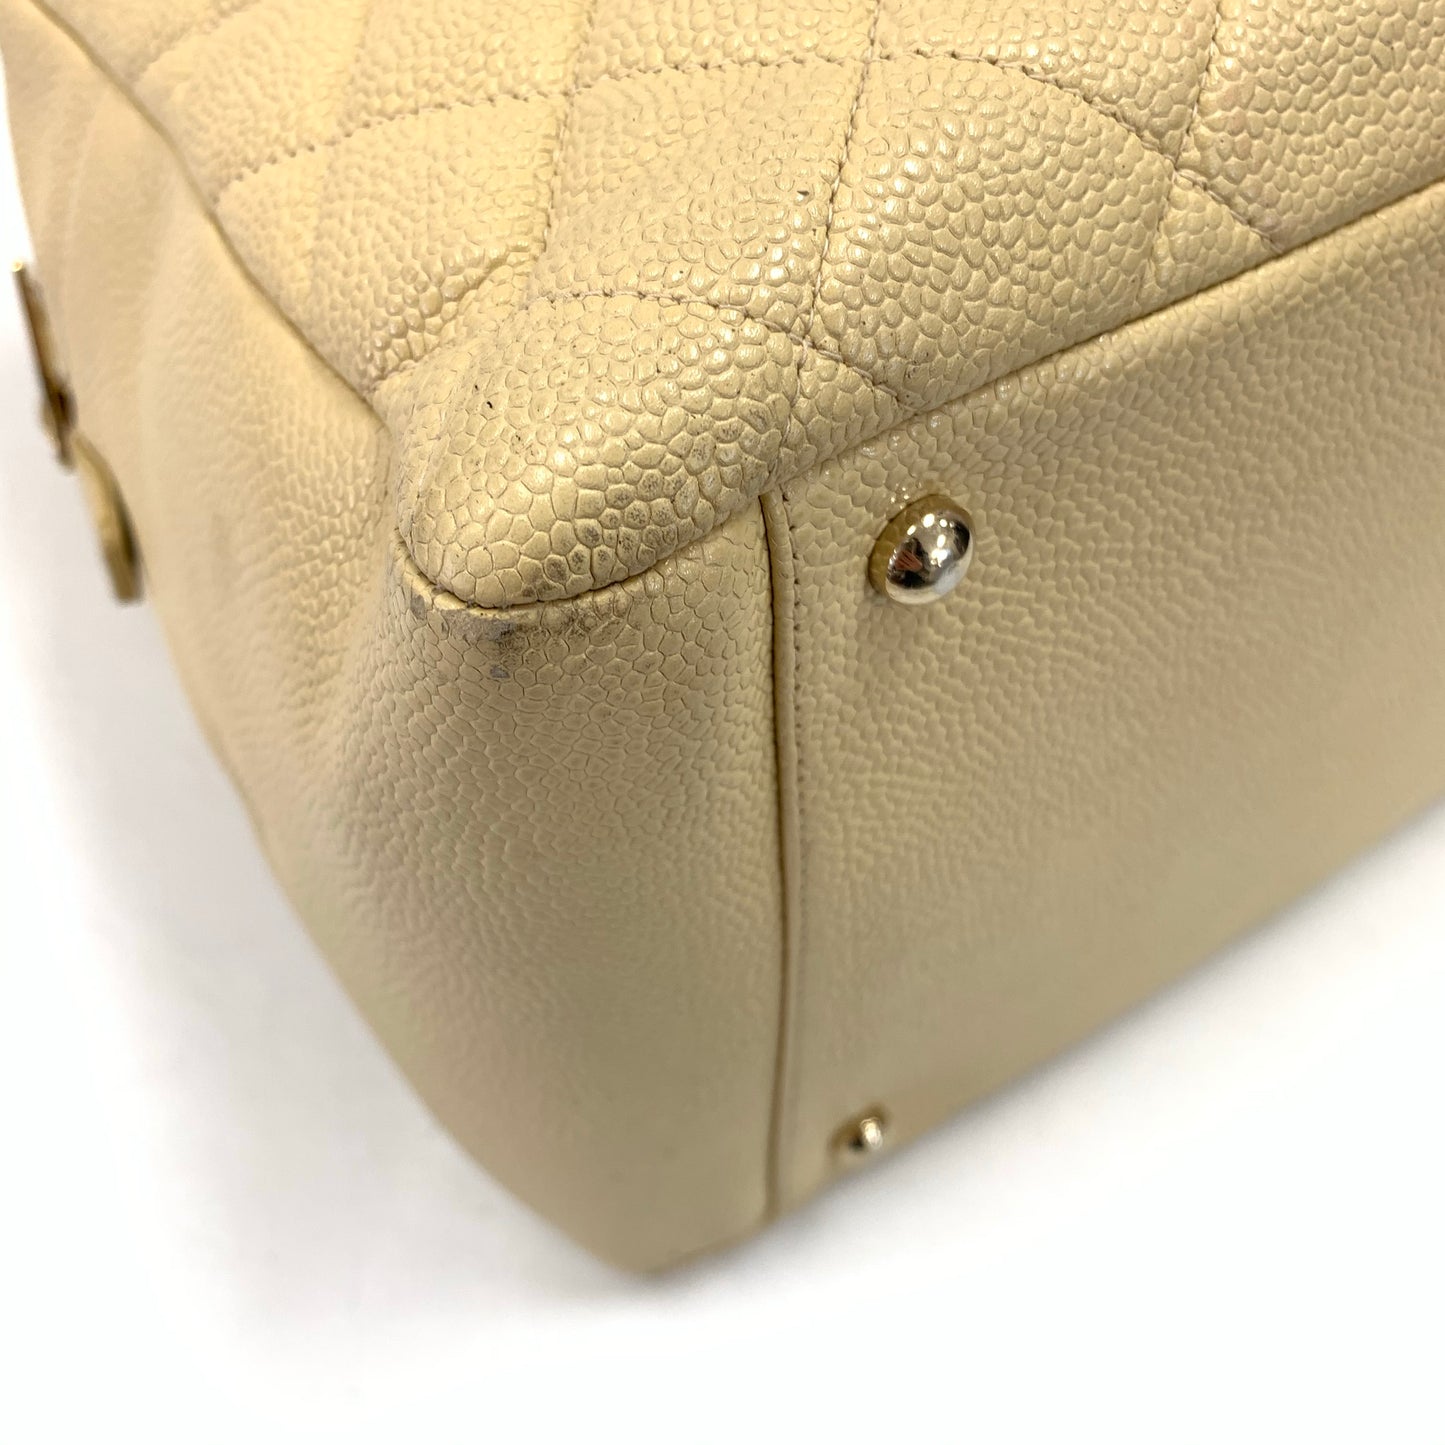 Authentic Chanel Light Beige Grand Timeless Tote